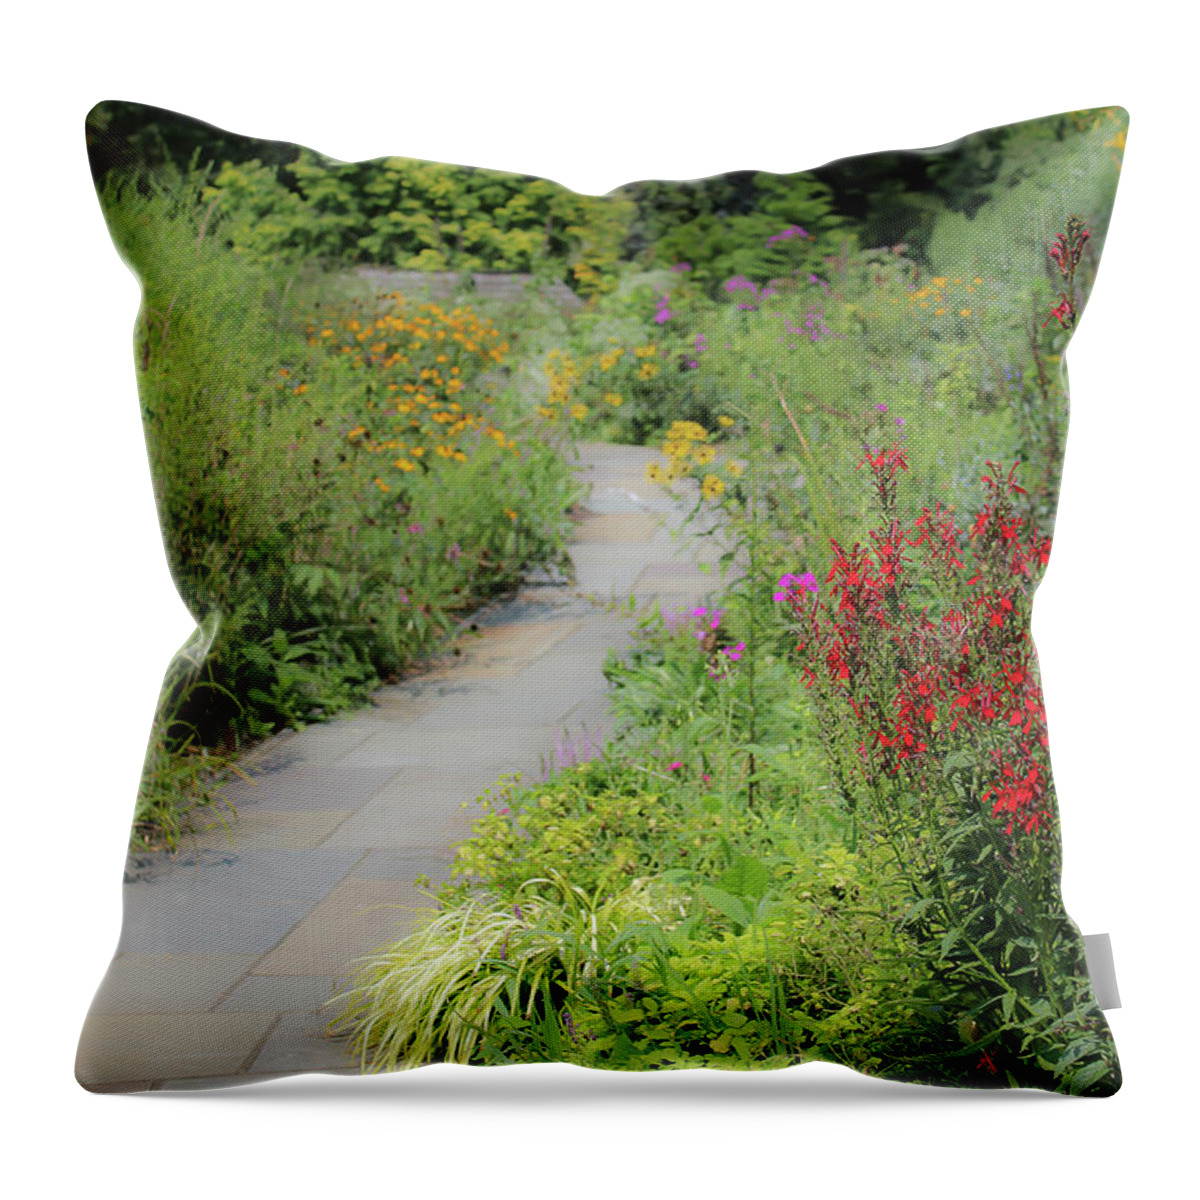  Throw Pillow featuring the photograph Colorful Pathway by Deborah Crew-Johnson